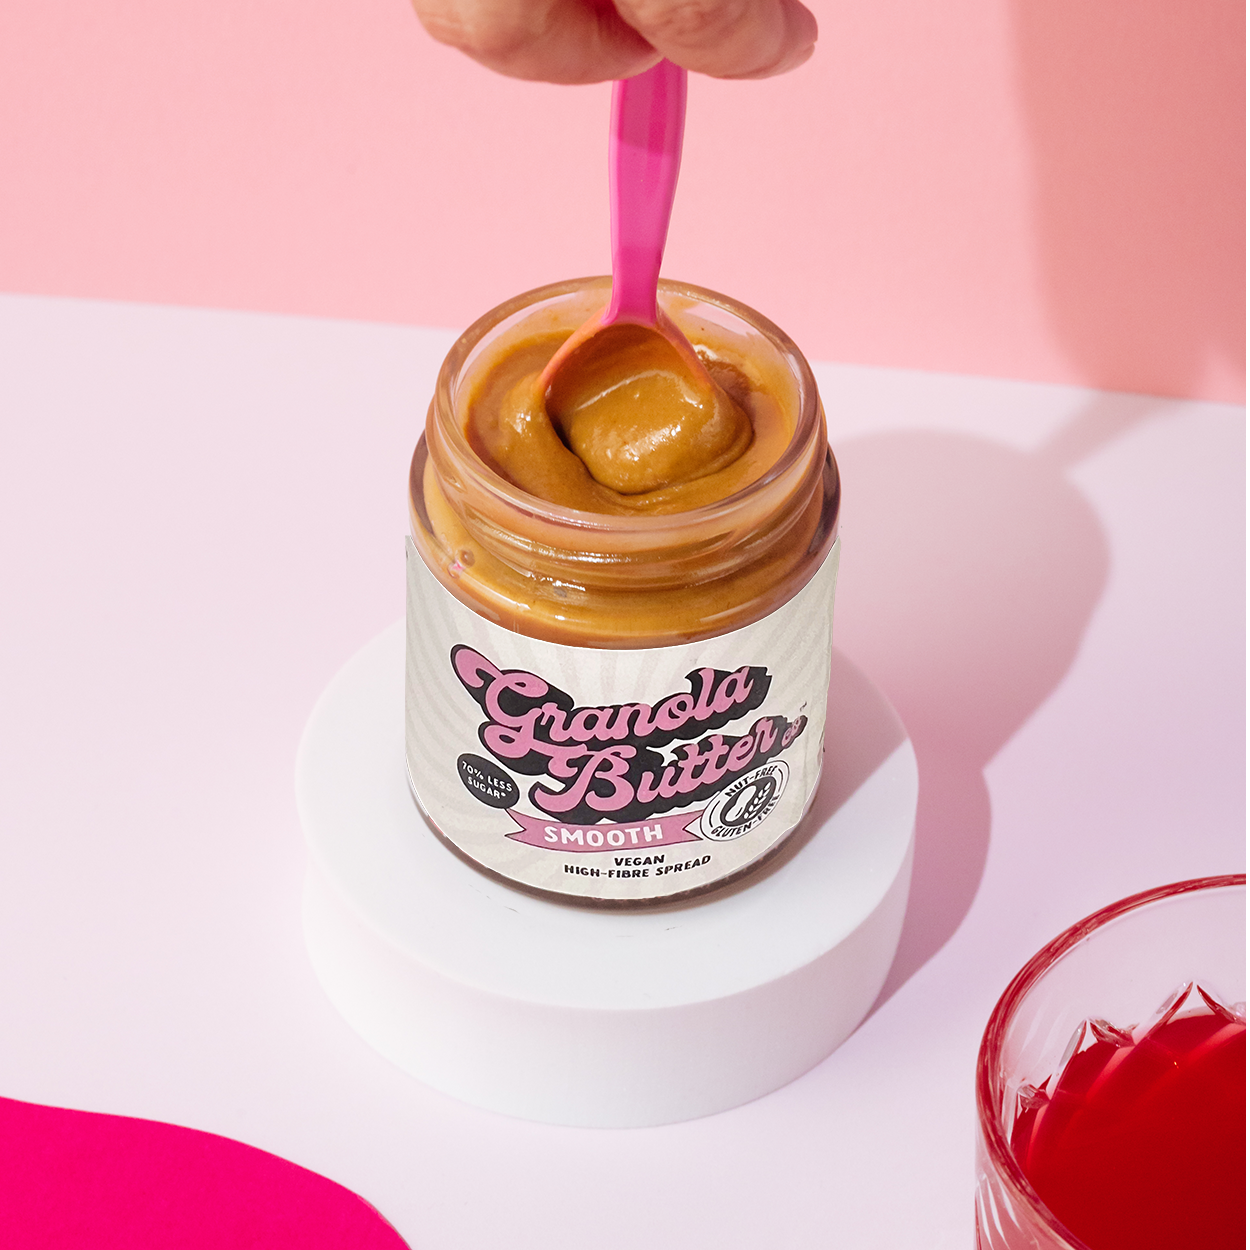 A pink spoon swirling the gluten free and high fibre smooth granola butter in the jar. 